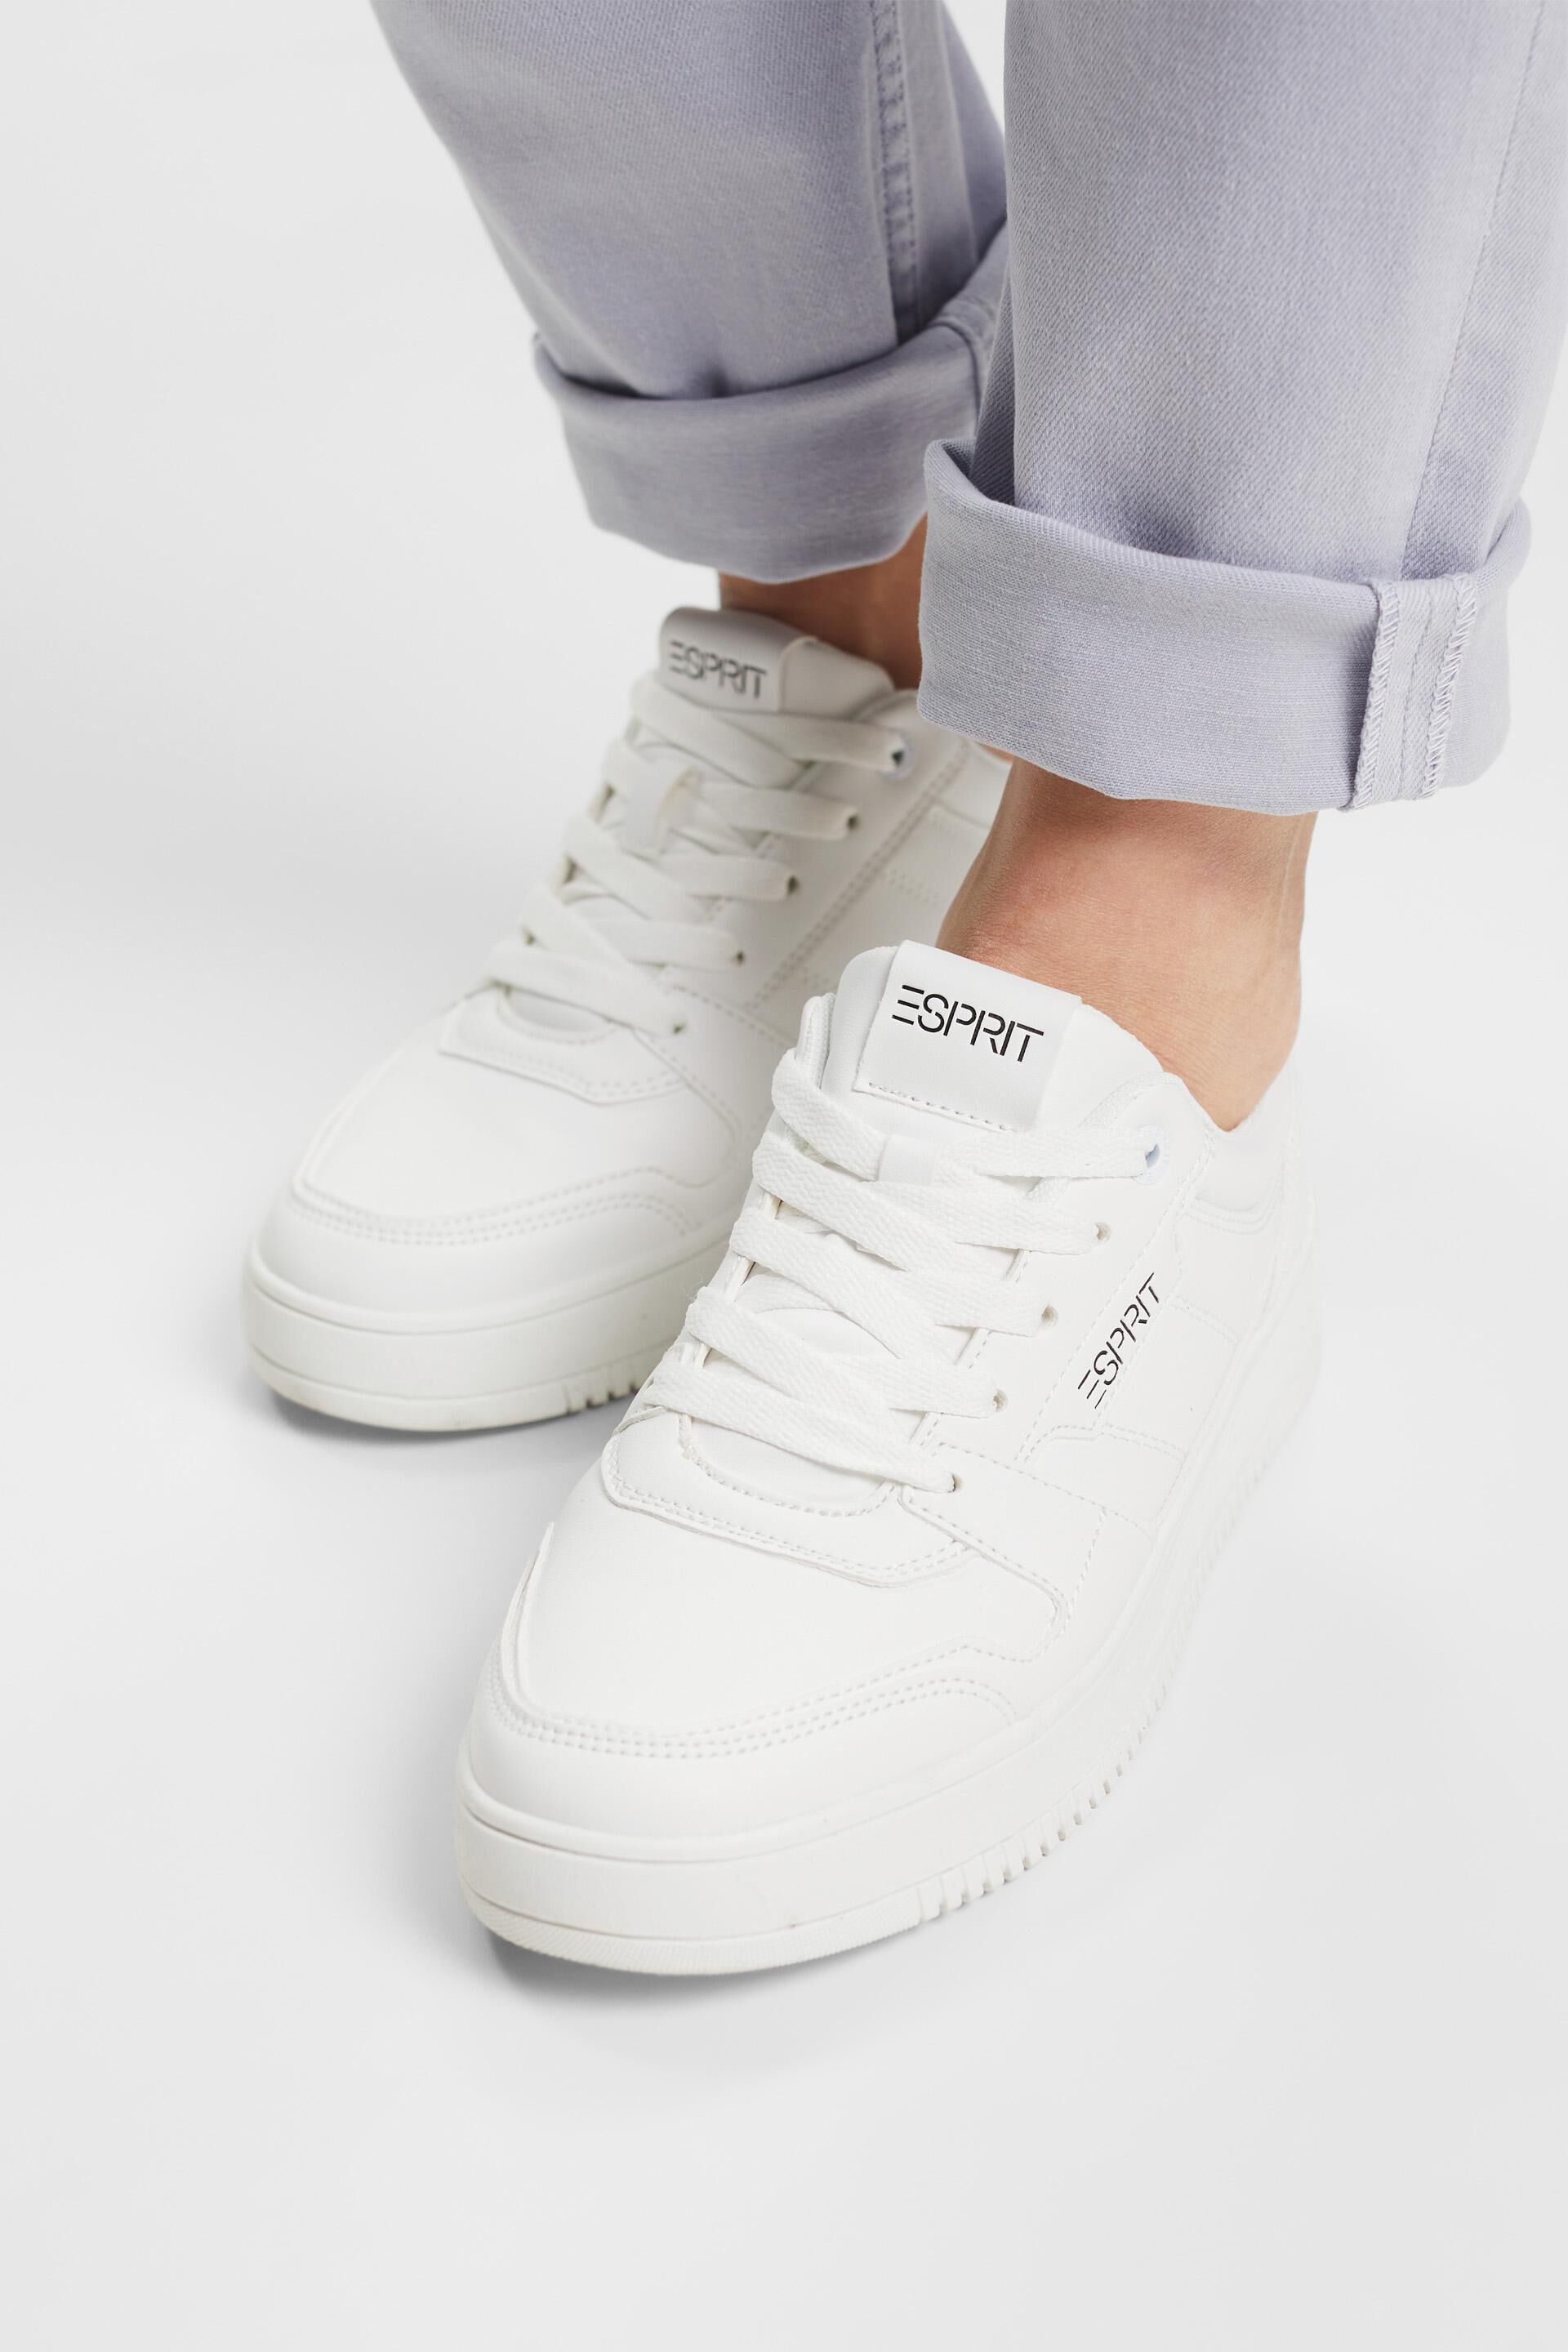 ESPRIT - Vegan Leather Sneakers at our online shop